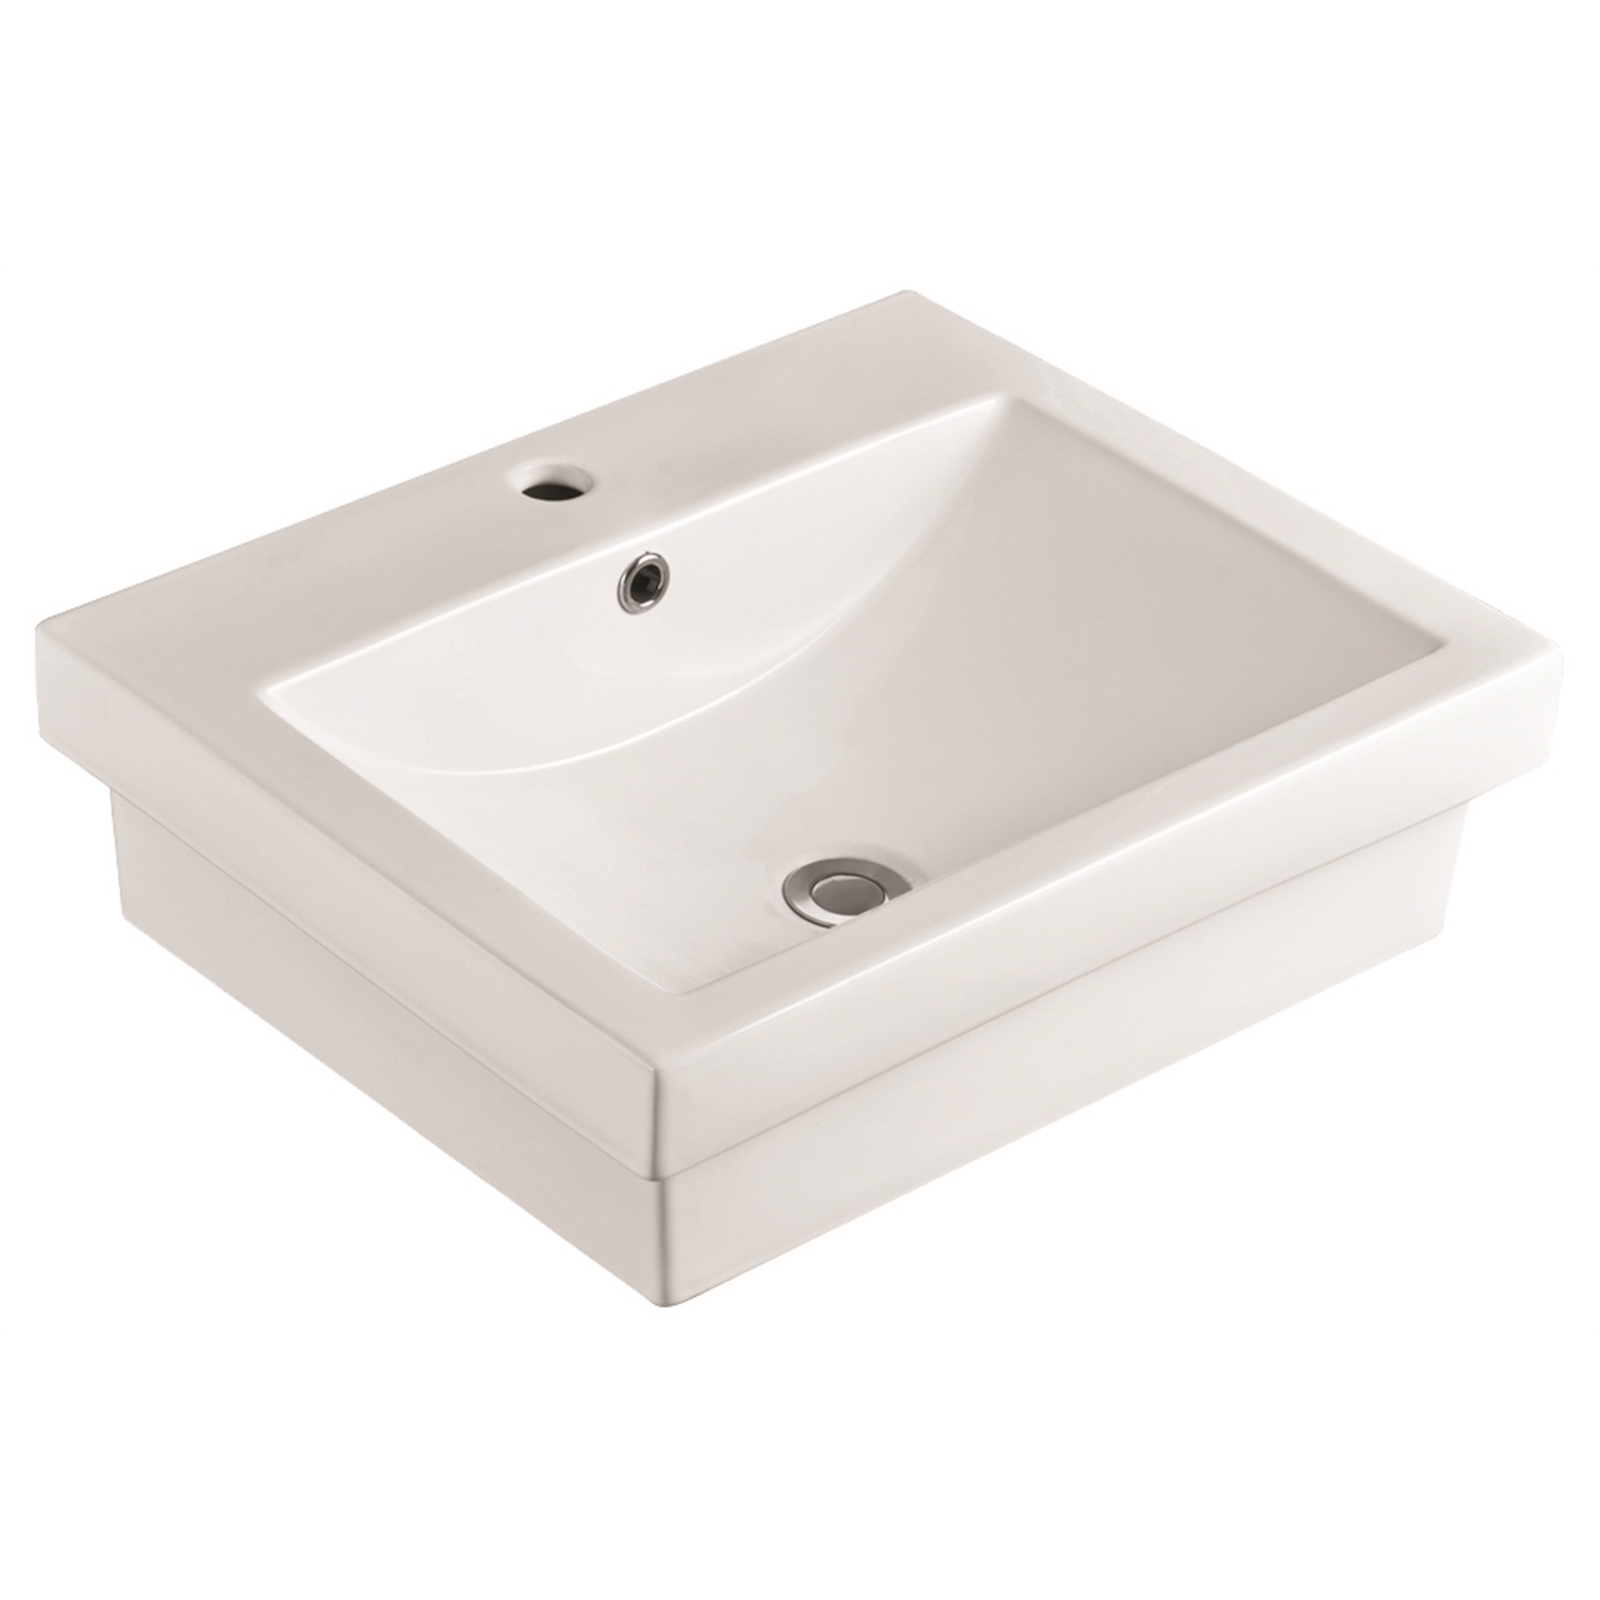 Everhard 1TH Virtue Square Insert Basin with Chrome Pop Up Waste